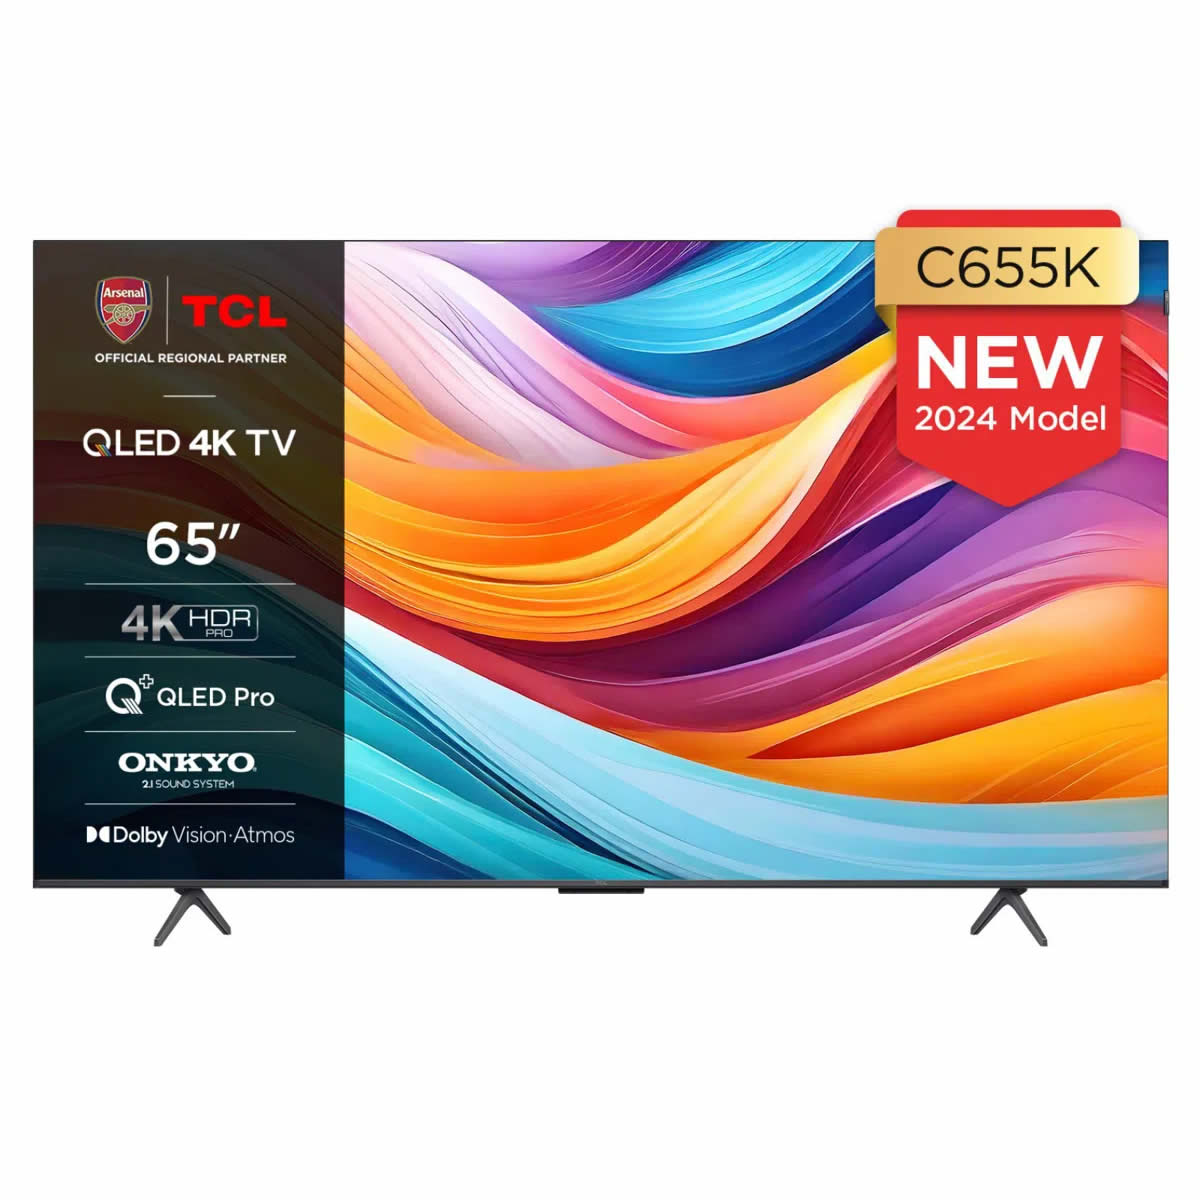 TCL 65inch 4K QLED PRO SMART TV WiFi Freeview HD Google